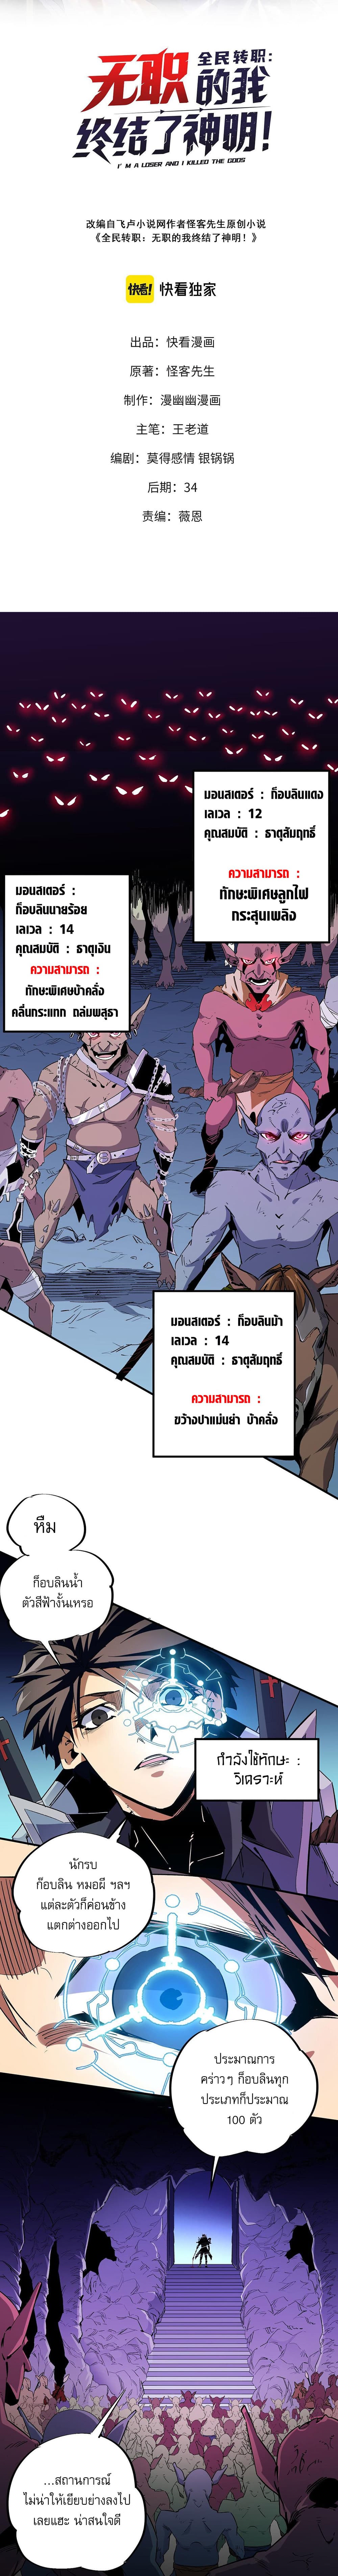 Job Changing for the Entire Population: The Jobless Me Will Terminate the Gods ฉันคือผู้เล่นไร้อาชีพที่สังหารเหล่าเทพ 3-3